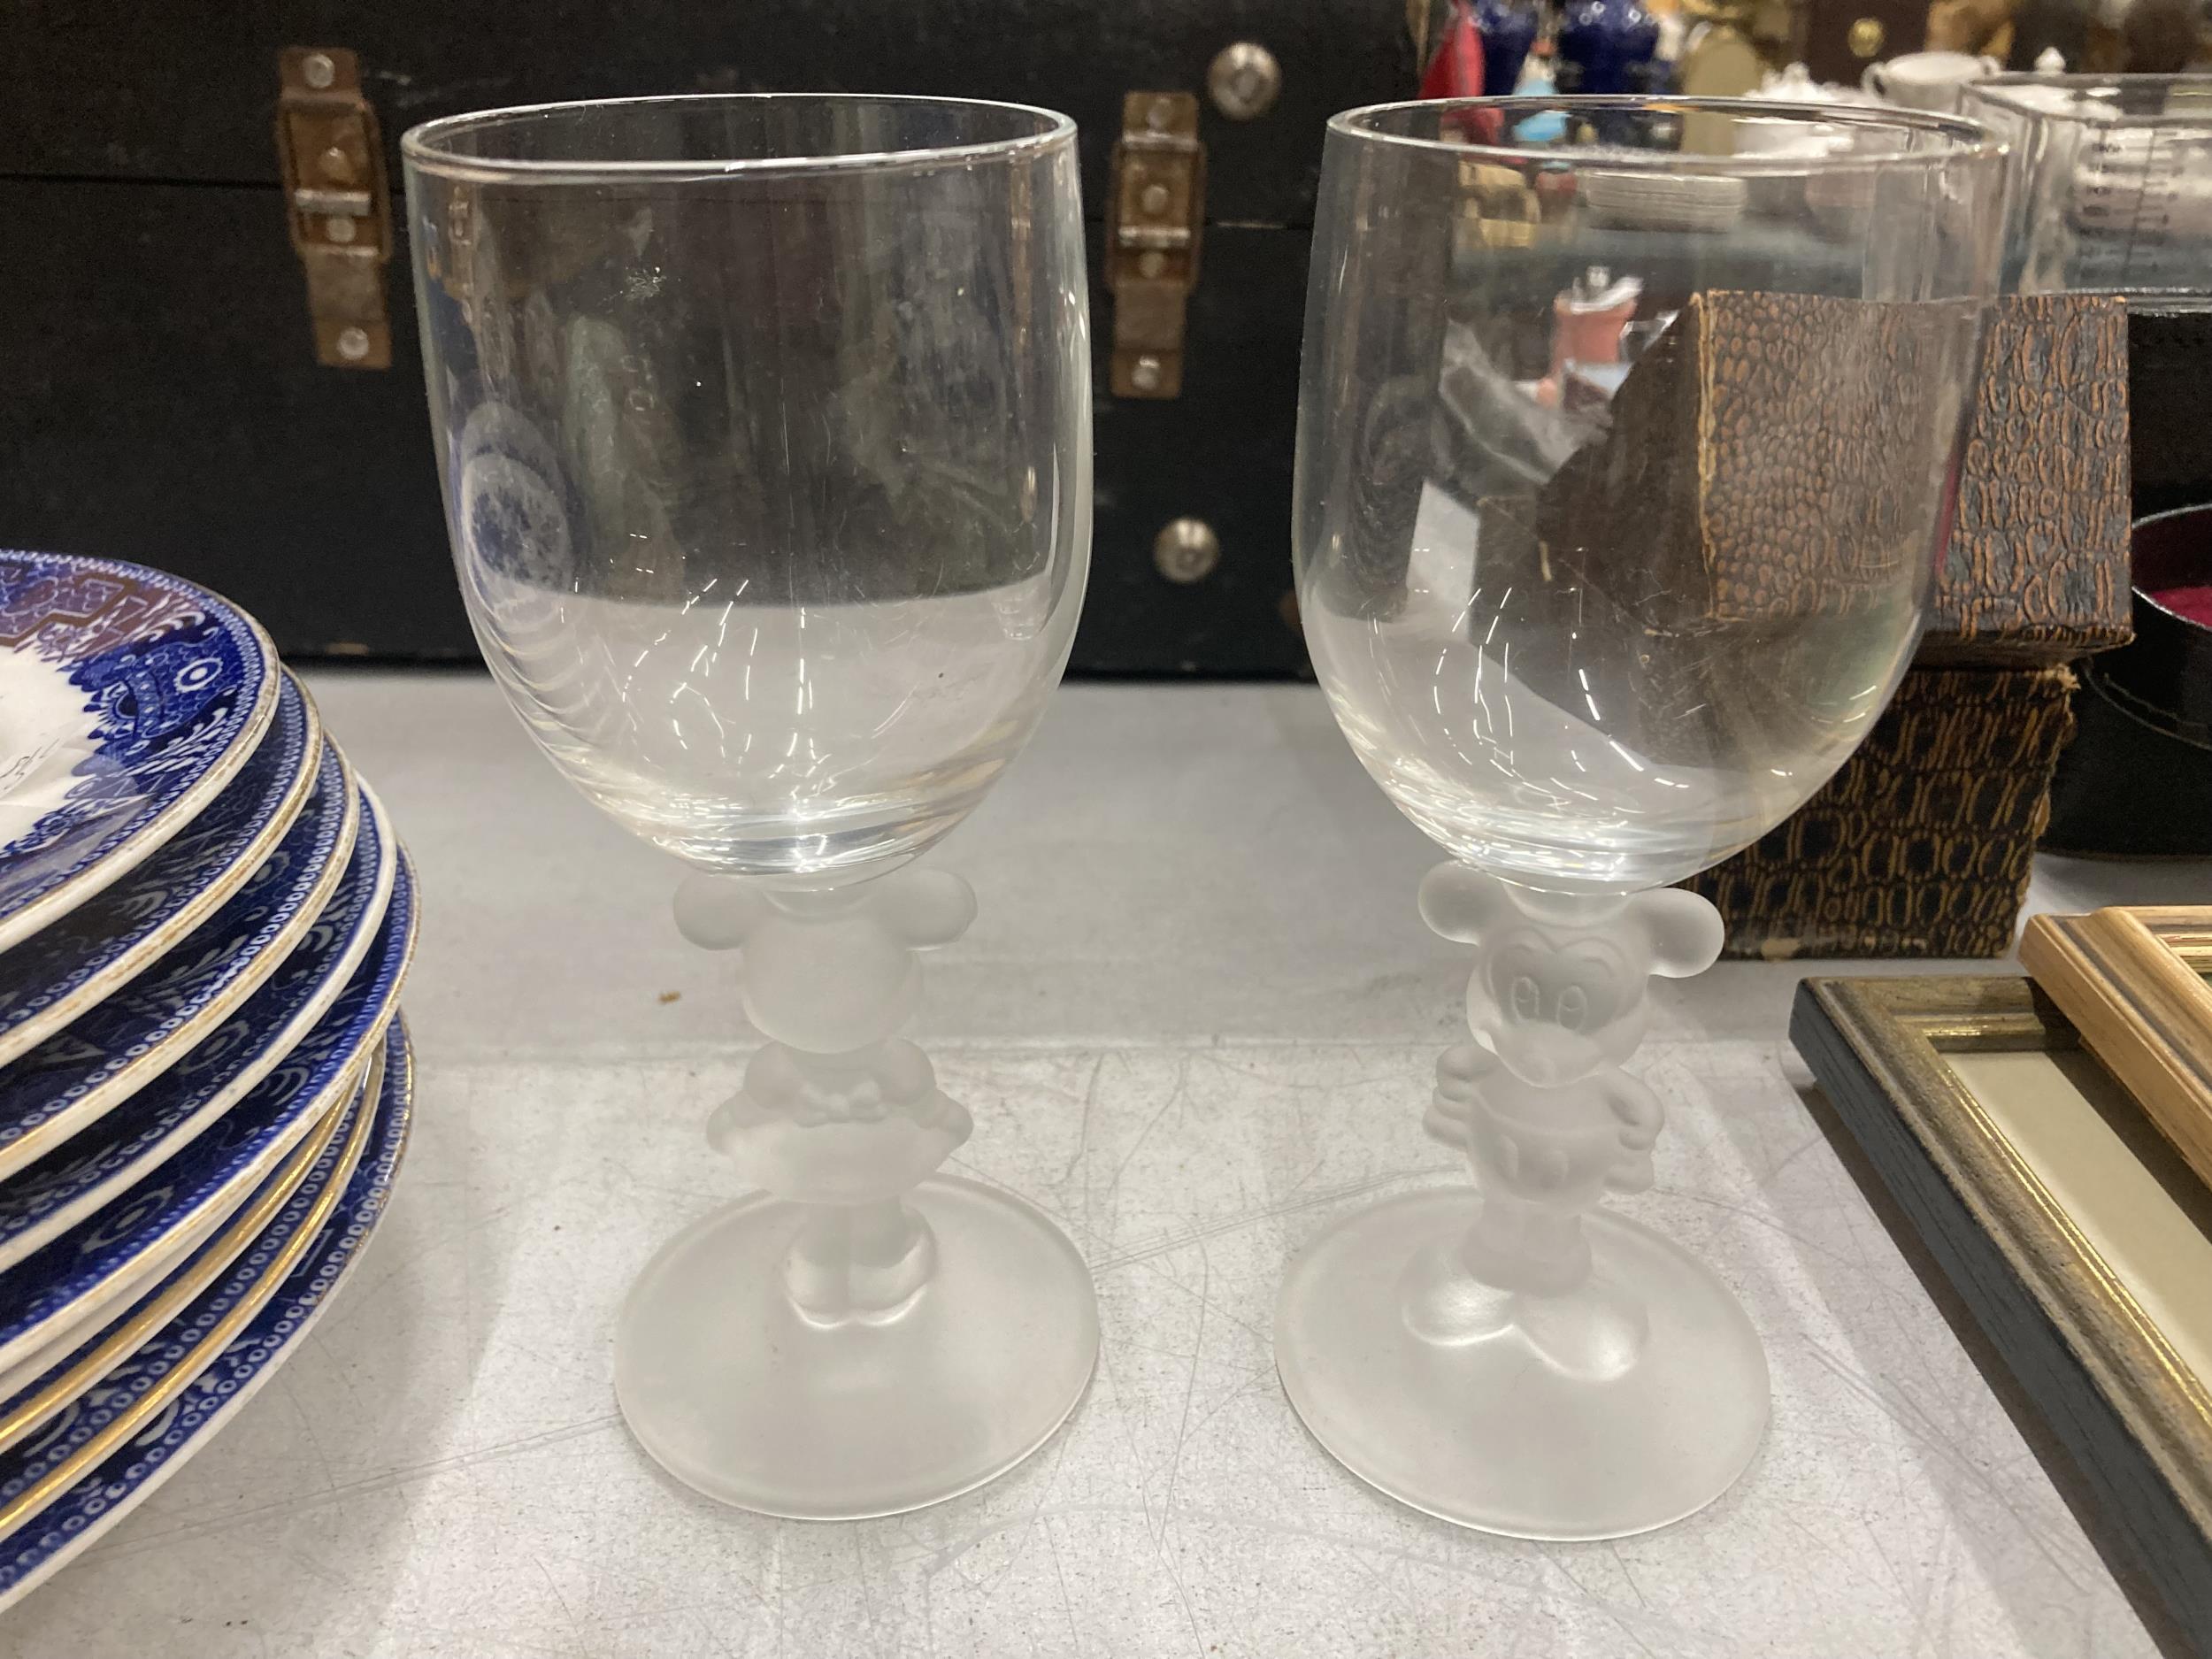 TWO FROSTED GLASS DISNEY MICKEY & MINNIE HOUSE DESIGN GLASSES